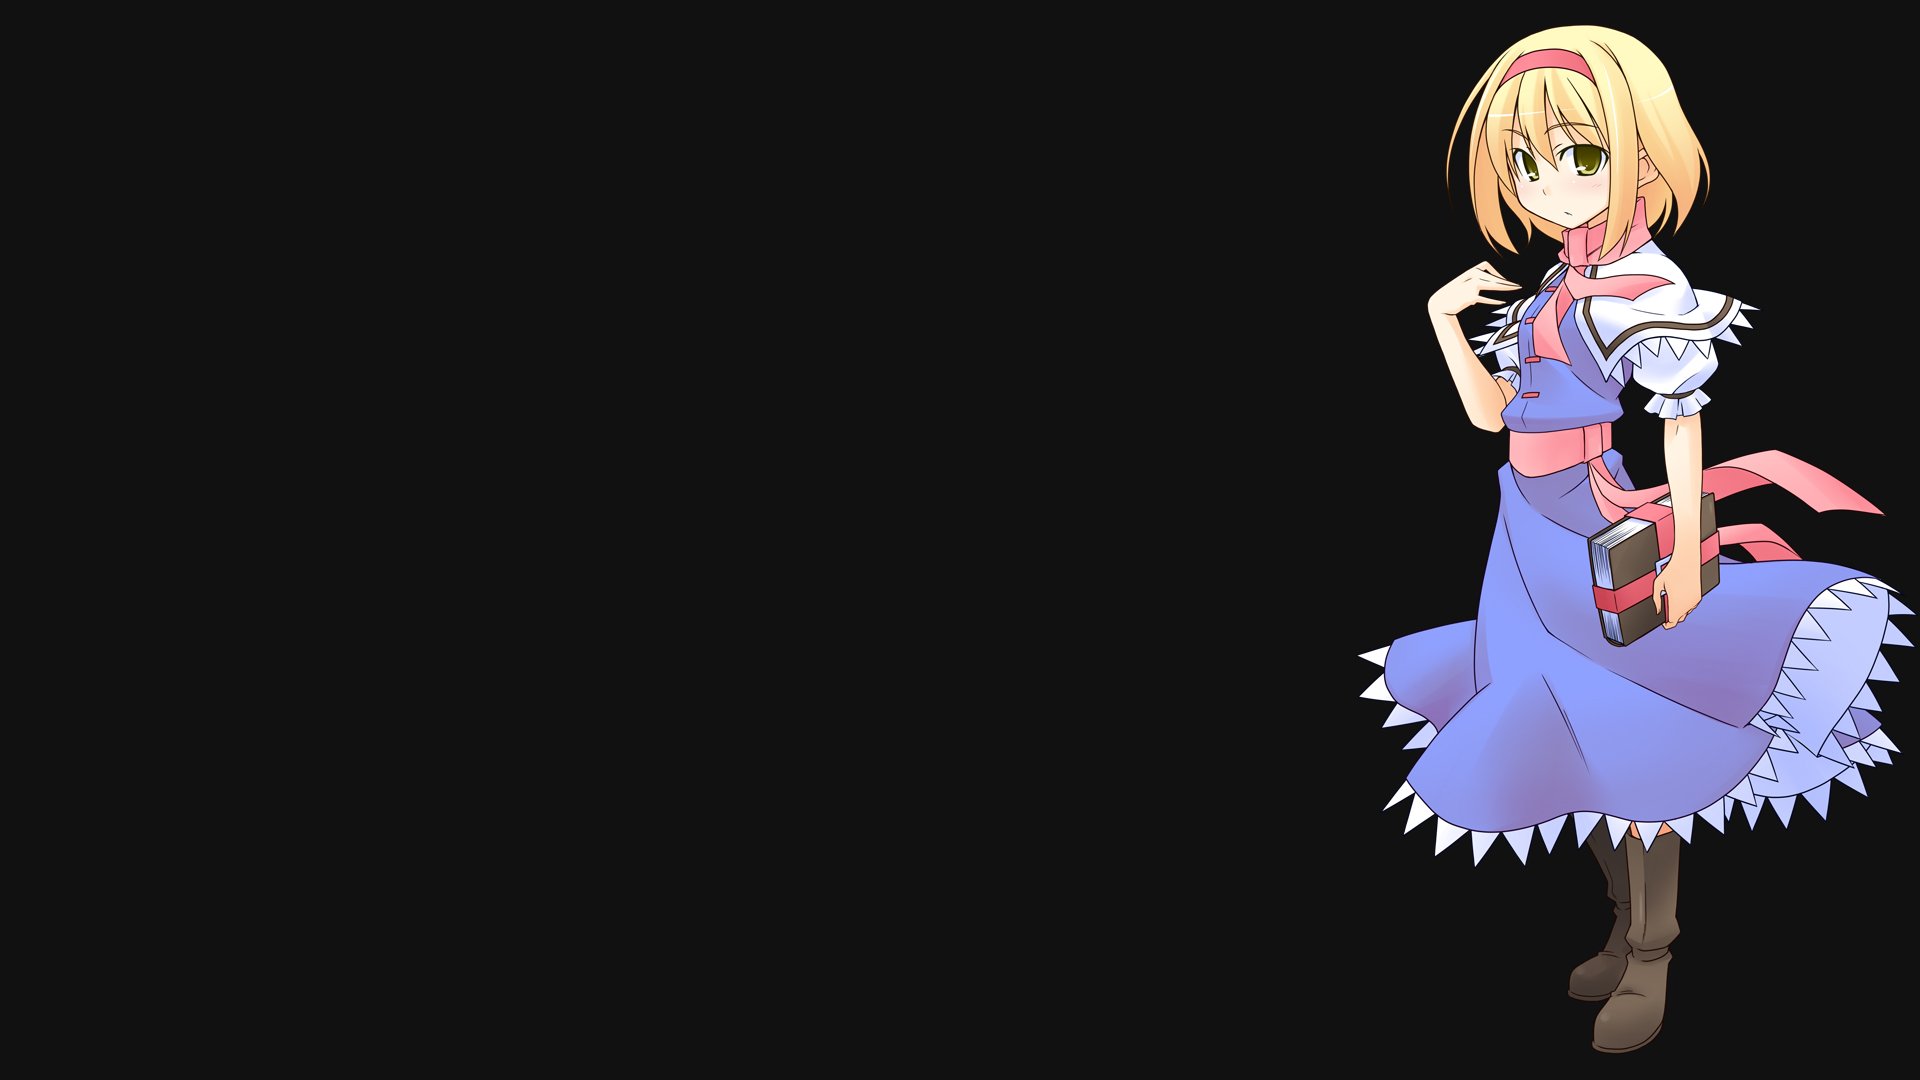 video, Games, Touhou, Dress, Alice, Margatroid, Simple, Background Wallpaper